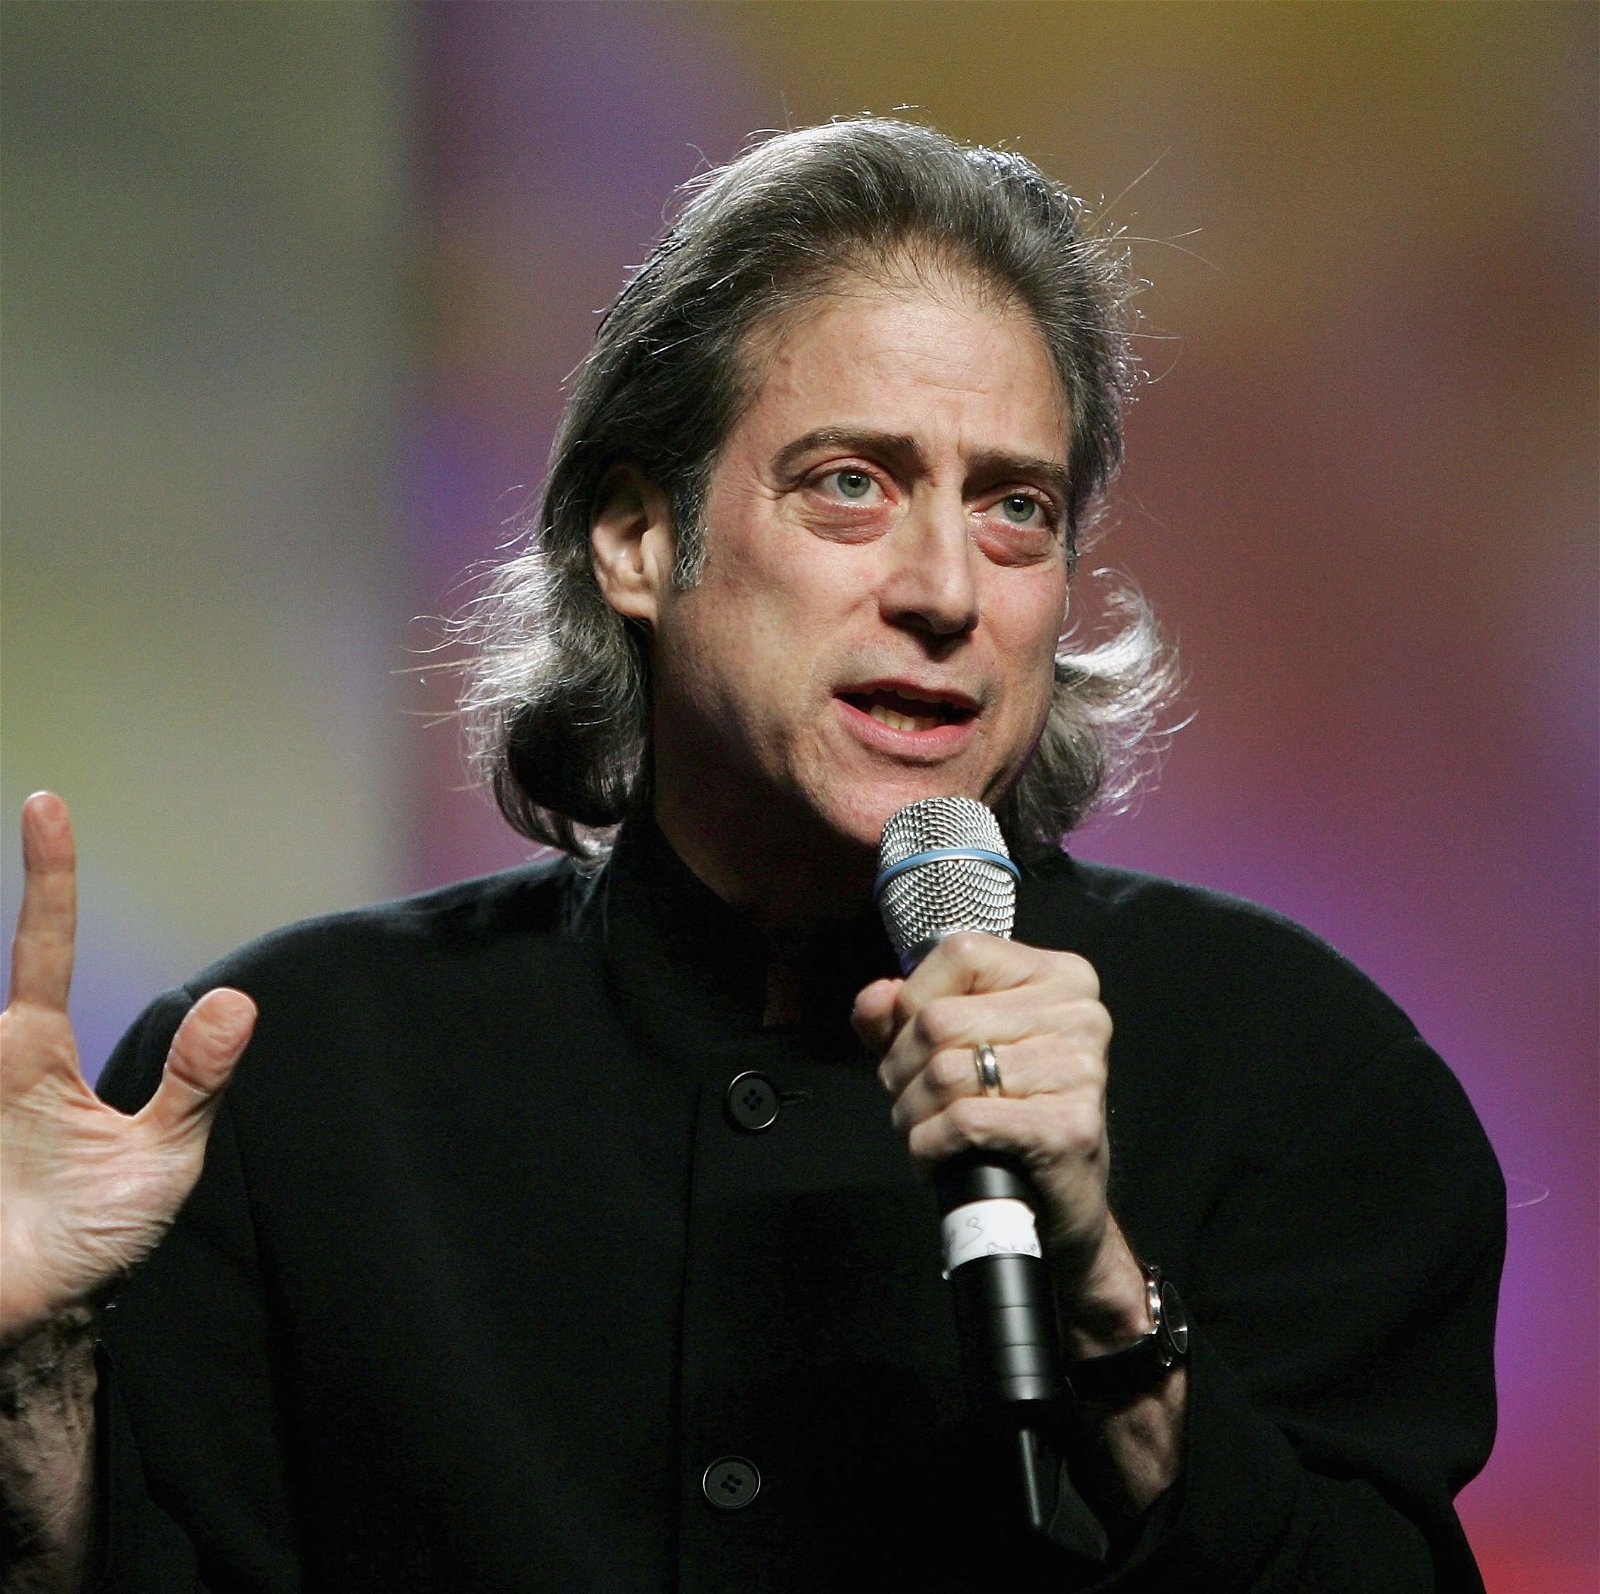 Richard Lewis Was the King of Self-Deprecating Comedy